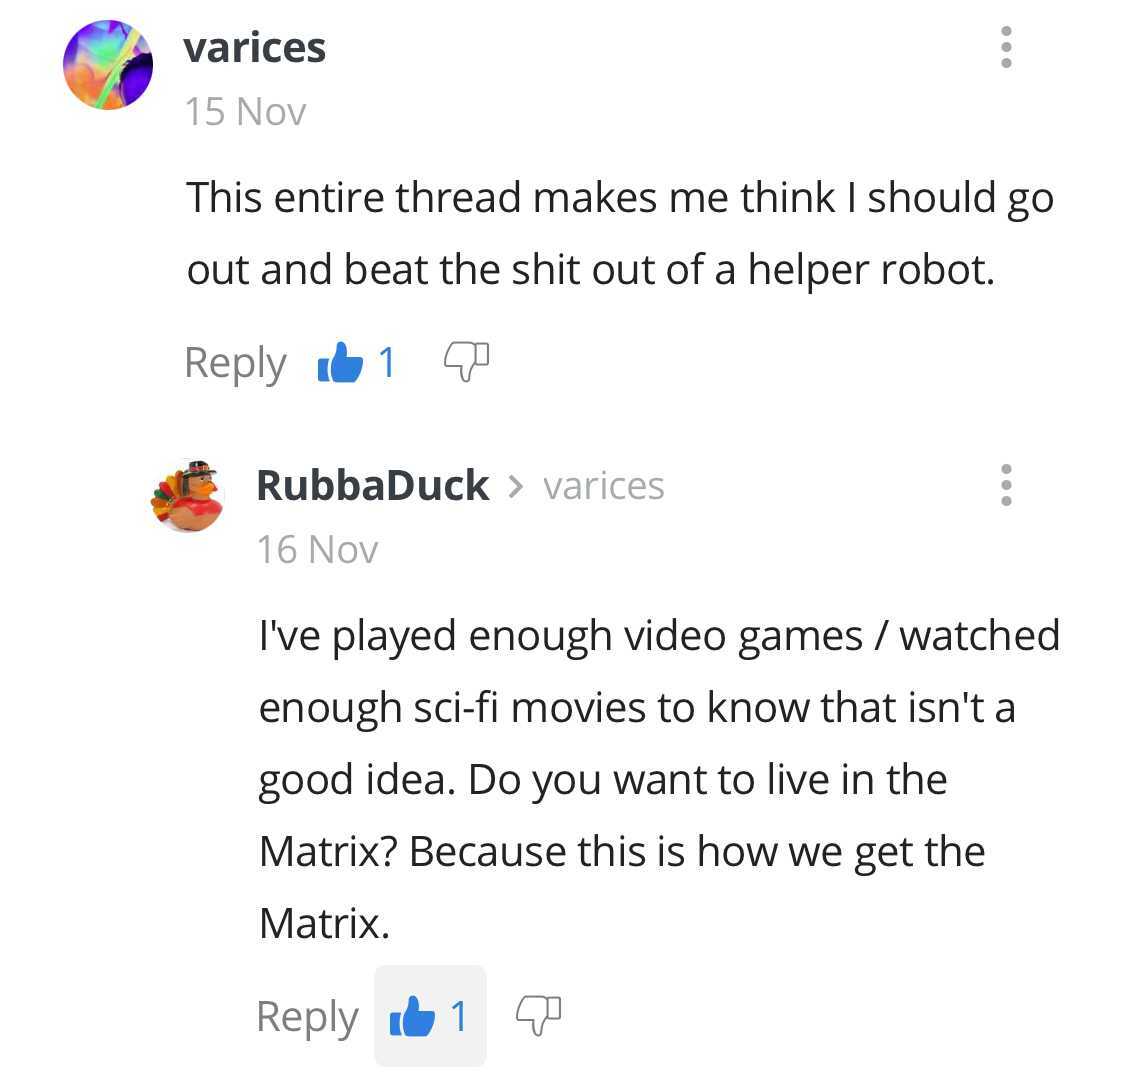 document - varices 15 Nov This entire thread makes me think I should go out and beat the shit out of a helper robot. 61 0 RubbaDuck > varices 16 Nov I've played enough video games watched enough scifi movies to know that isn't a good idea. Do you want to 